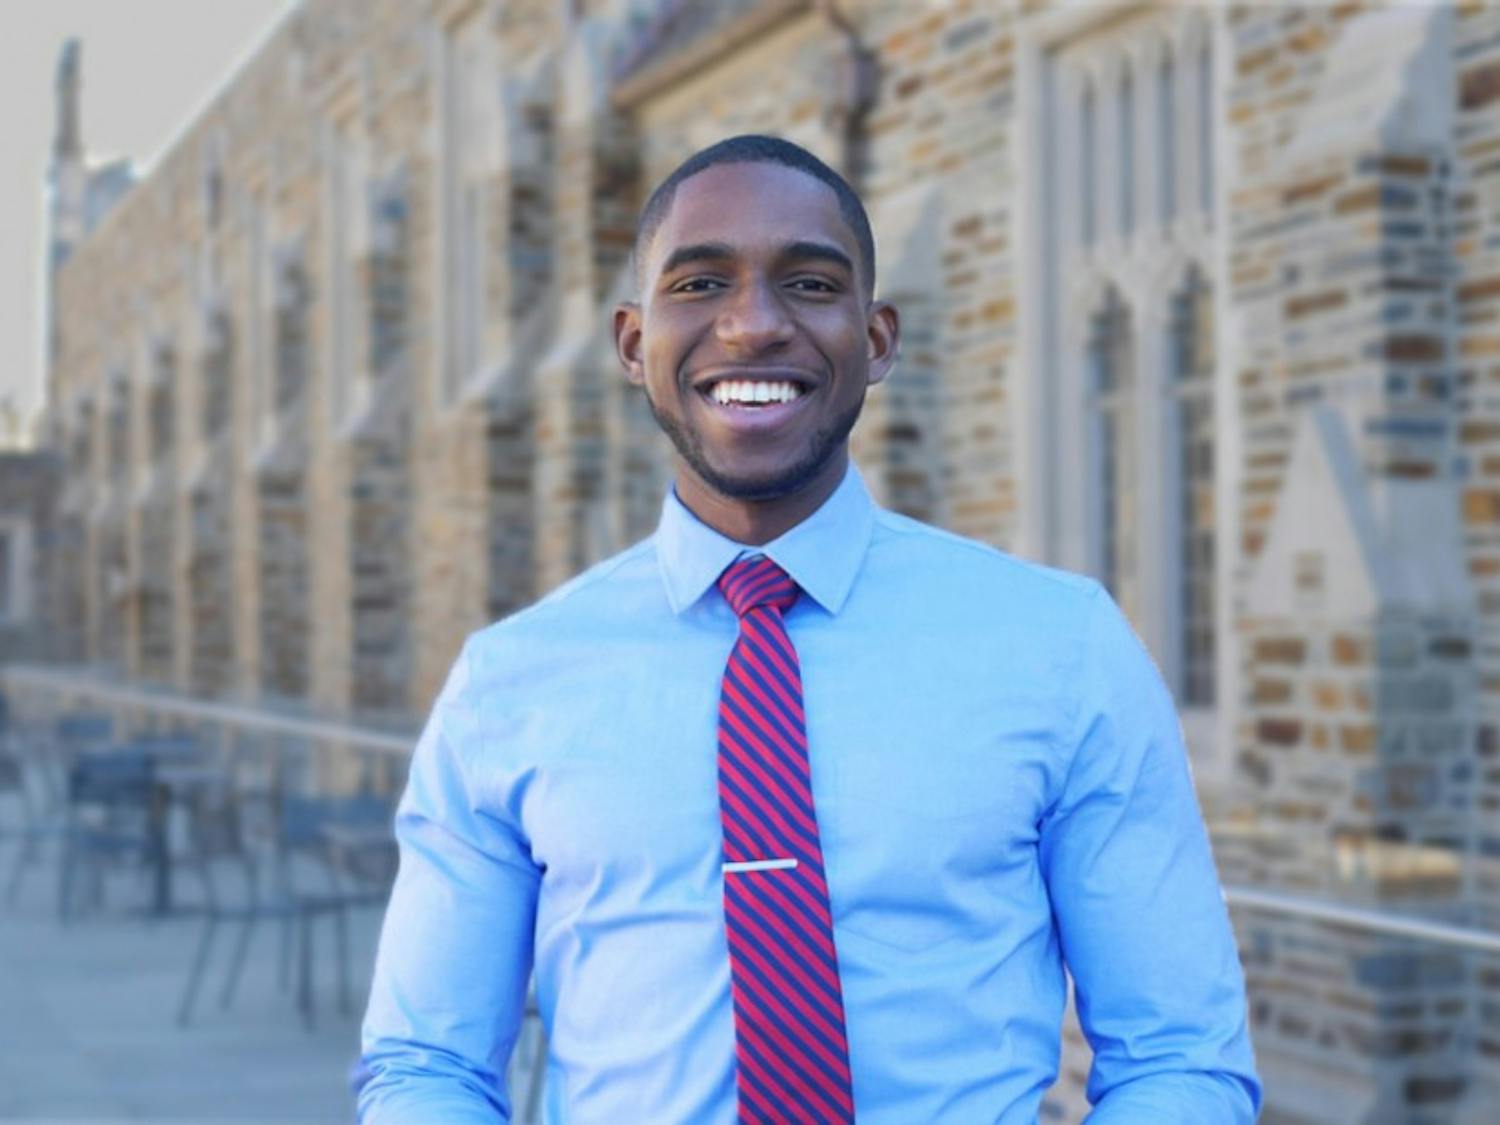 Ayogu is the Class of 2017 President for Engineering Student Government and co-founded The Releaf Group.